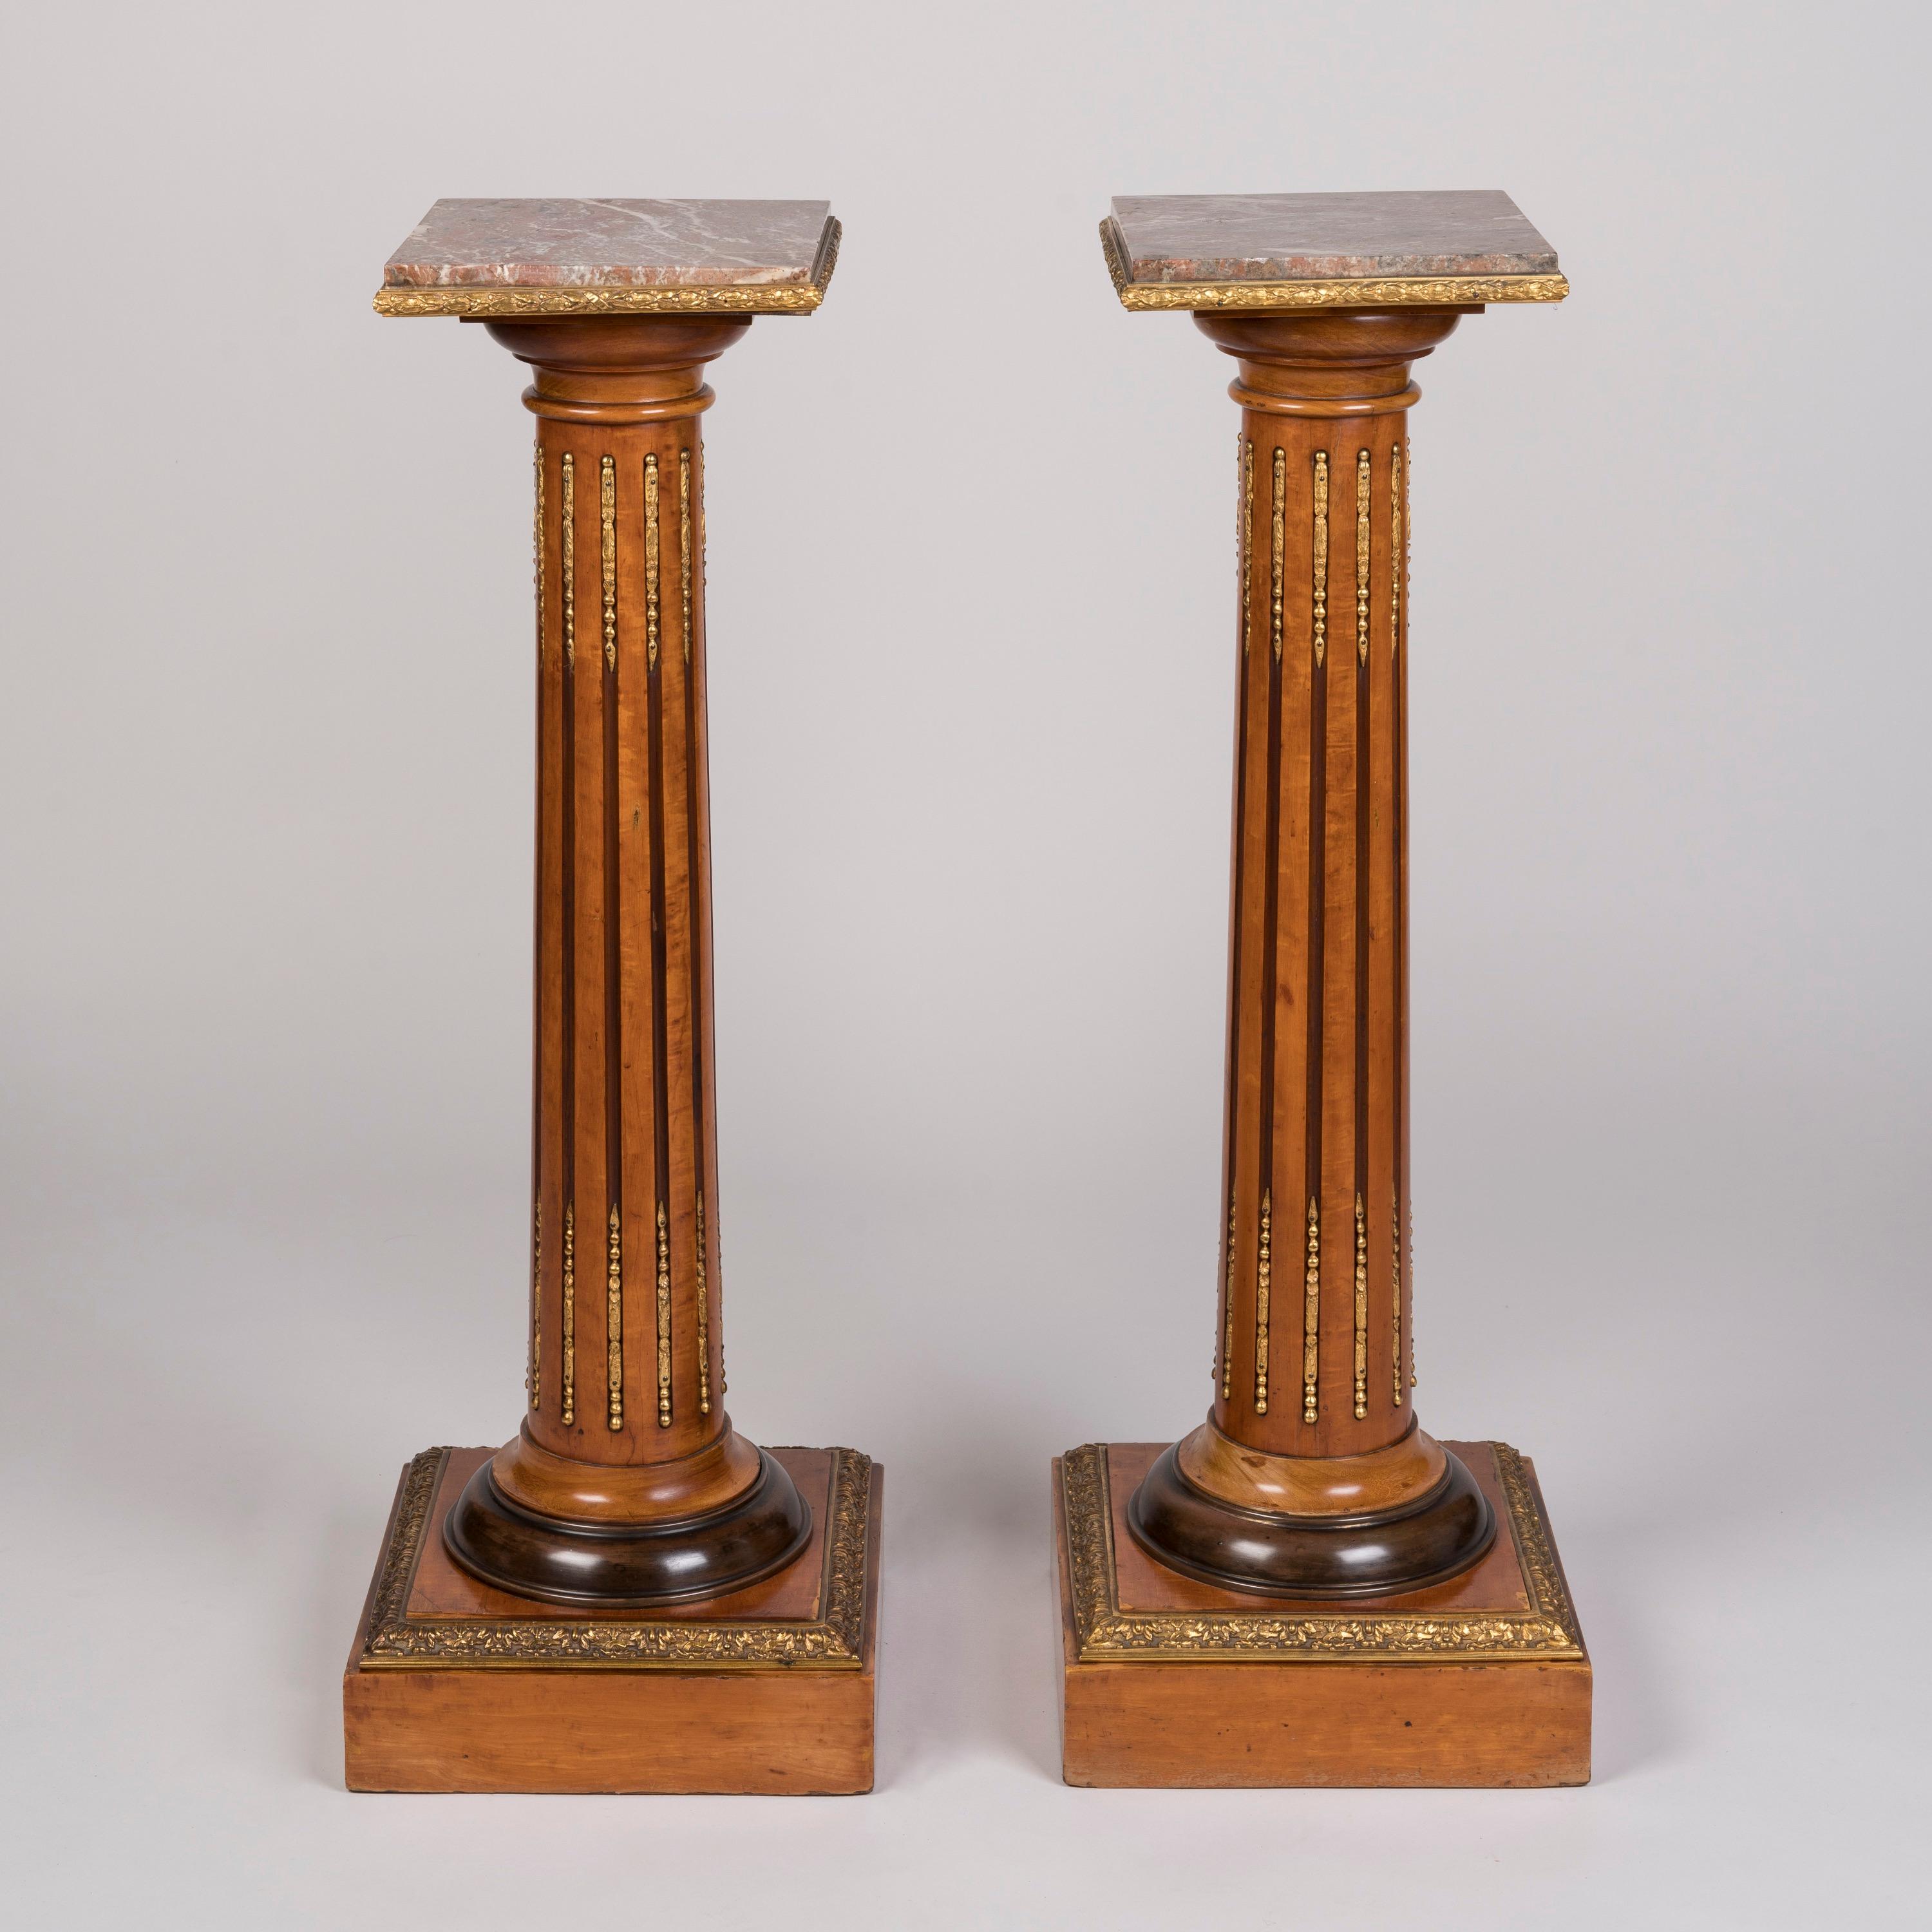 A Pair of Ormolu-Mounted Satinwood Pedestals

Veneered in satinwood and adorned with ormolu mounts, each pedestal supported on a square plinth base, the tapering columns fluted and with gilt bronze inserts, the turned capitals supporting a pink